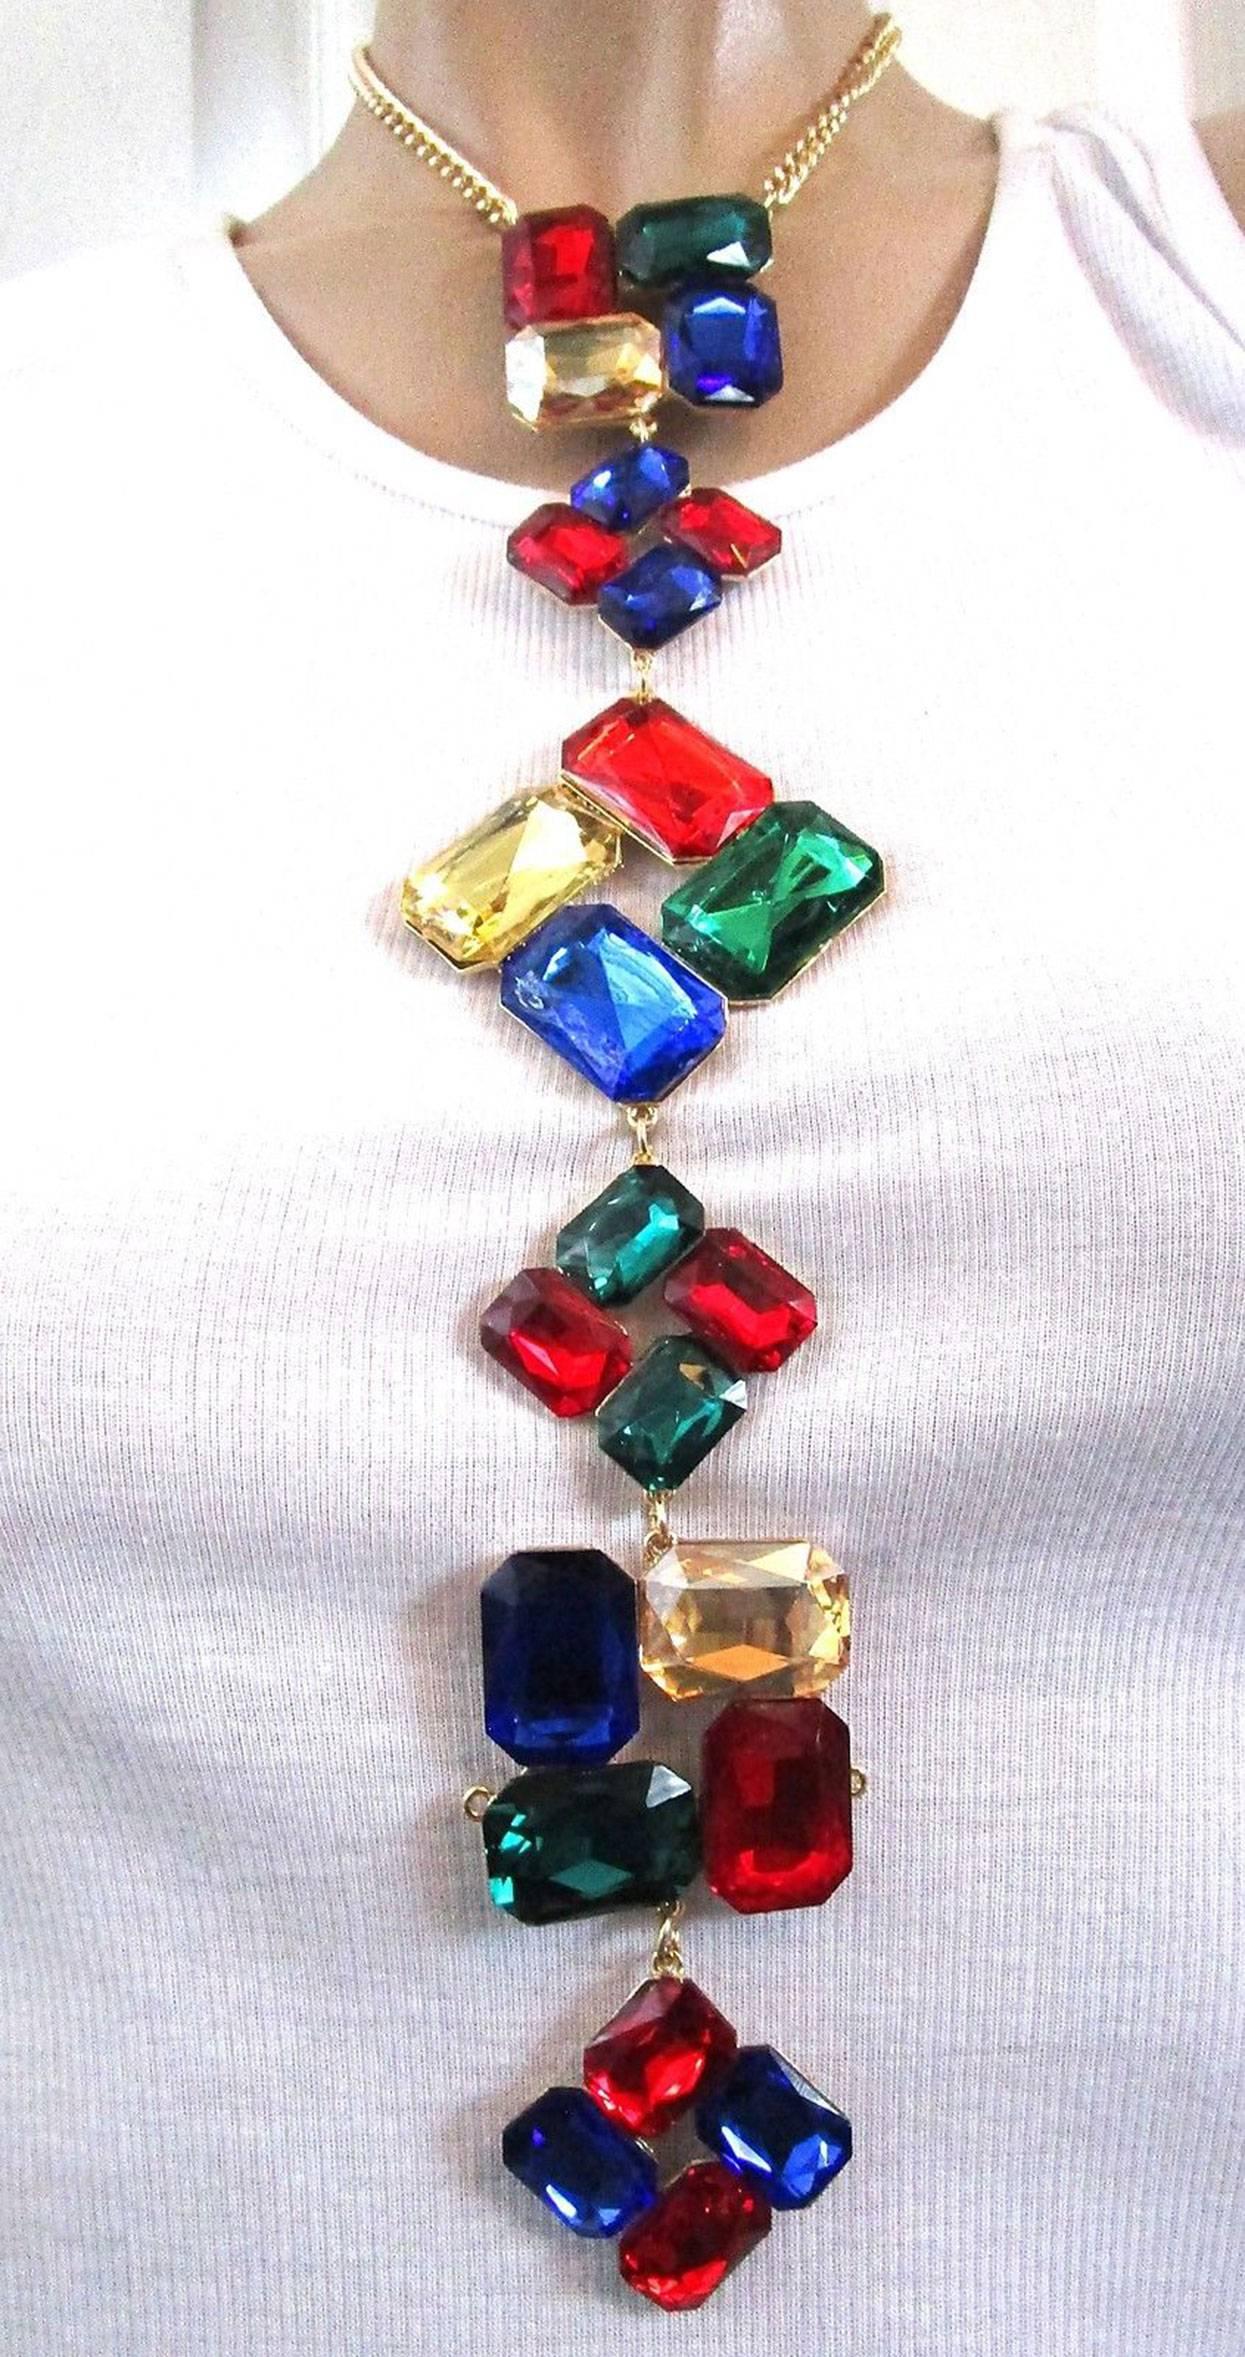 Sensational Runway Necklace set with huge square panels of colorful Faux Gem glass and Resin, rhinestones; the largest section having a lighter tint and being resin, the rest are all glass; massive 12 inch drop; gold tone setting; approx.  21.5